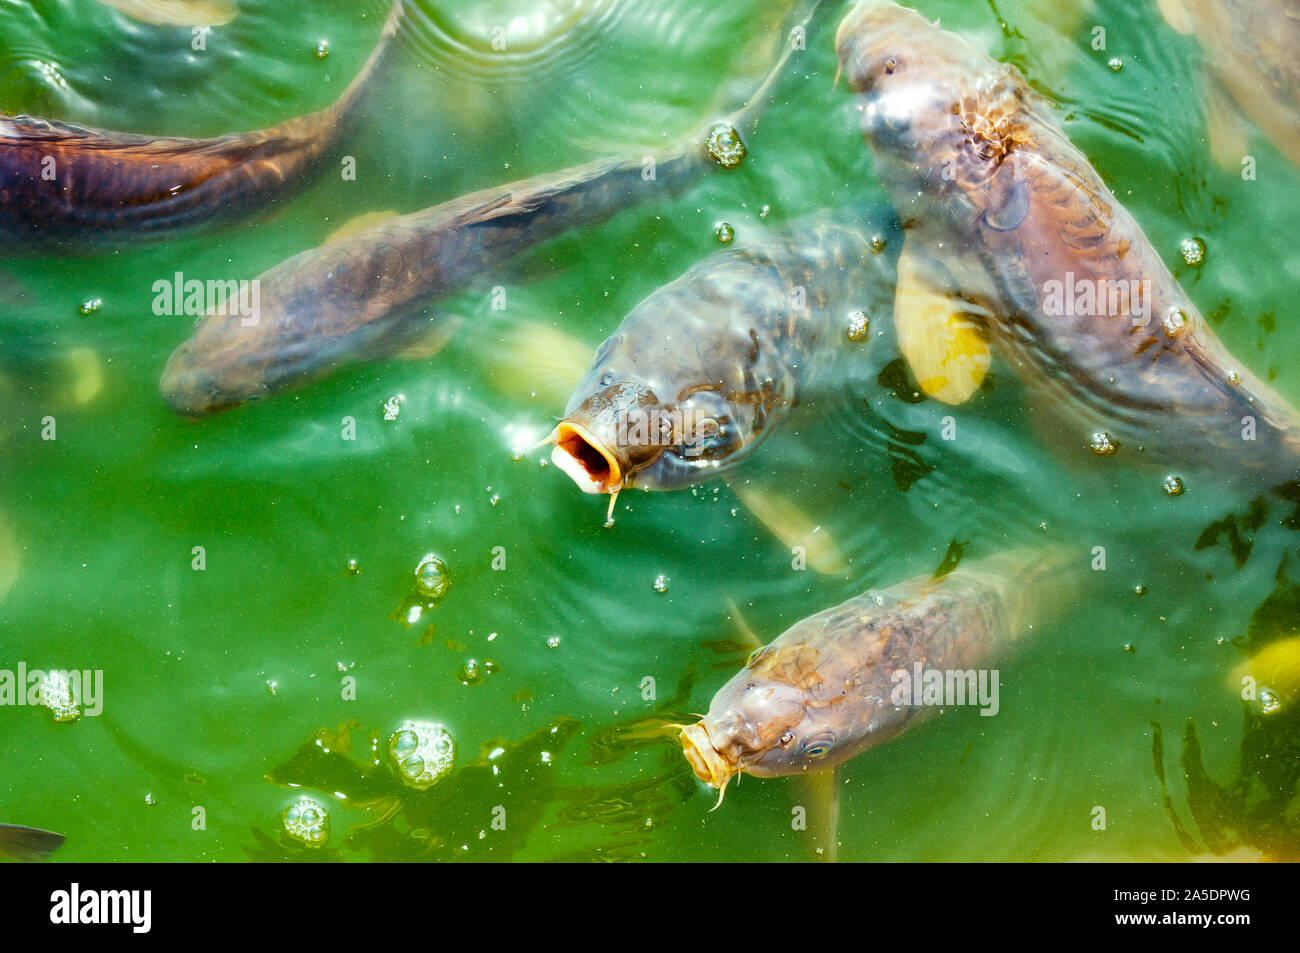 Carps. Fish species in a green lake Stock Photo